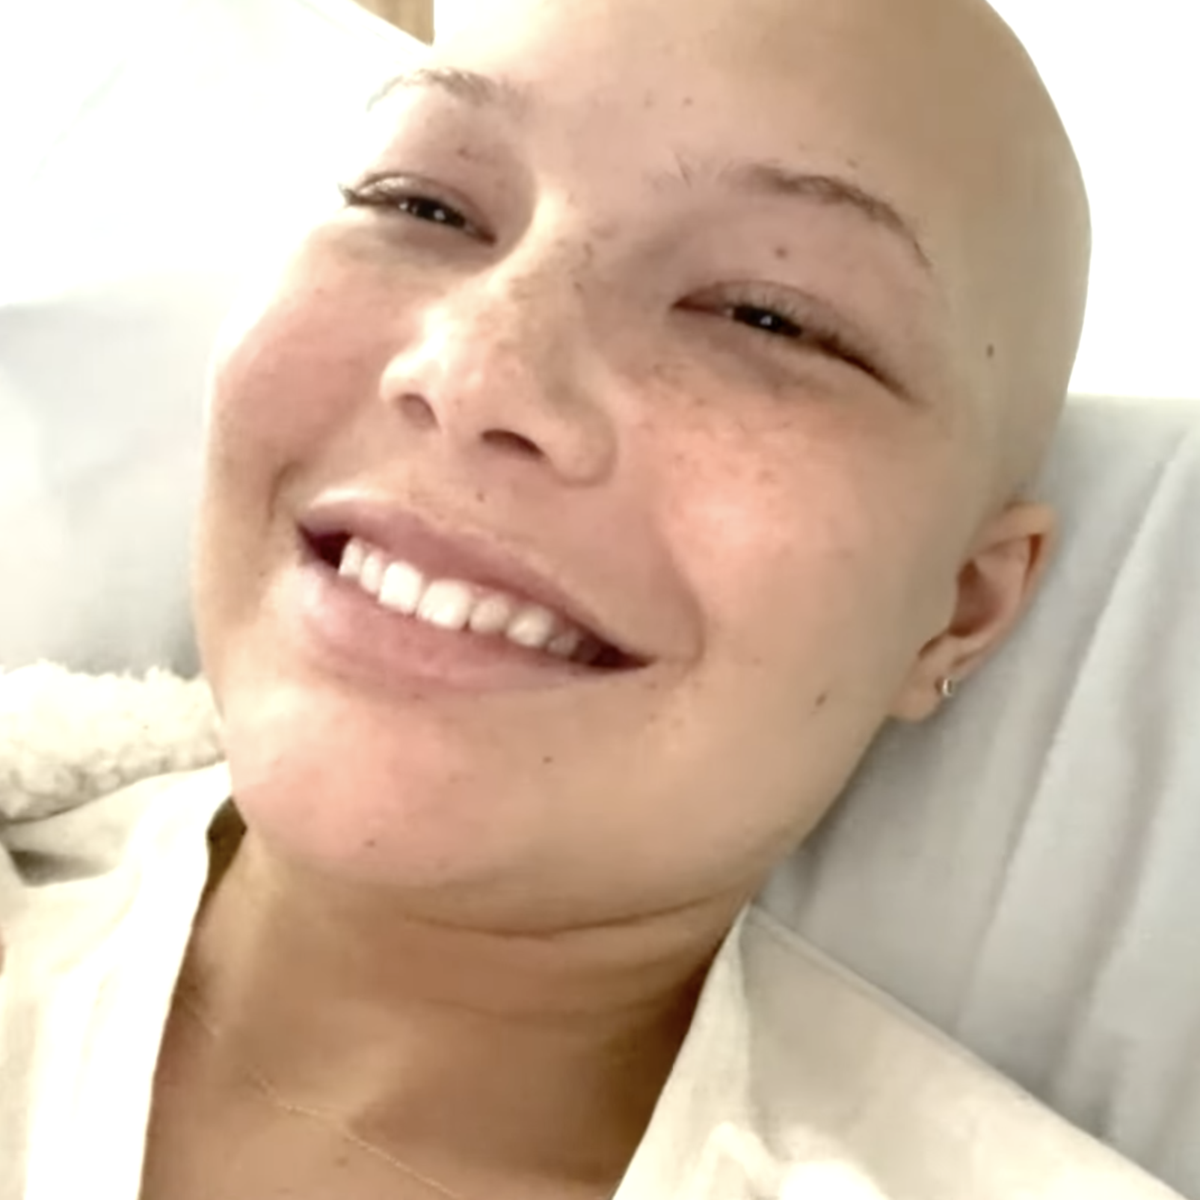 How Isabella Strahan Celebrated the End of Chemotherapy